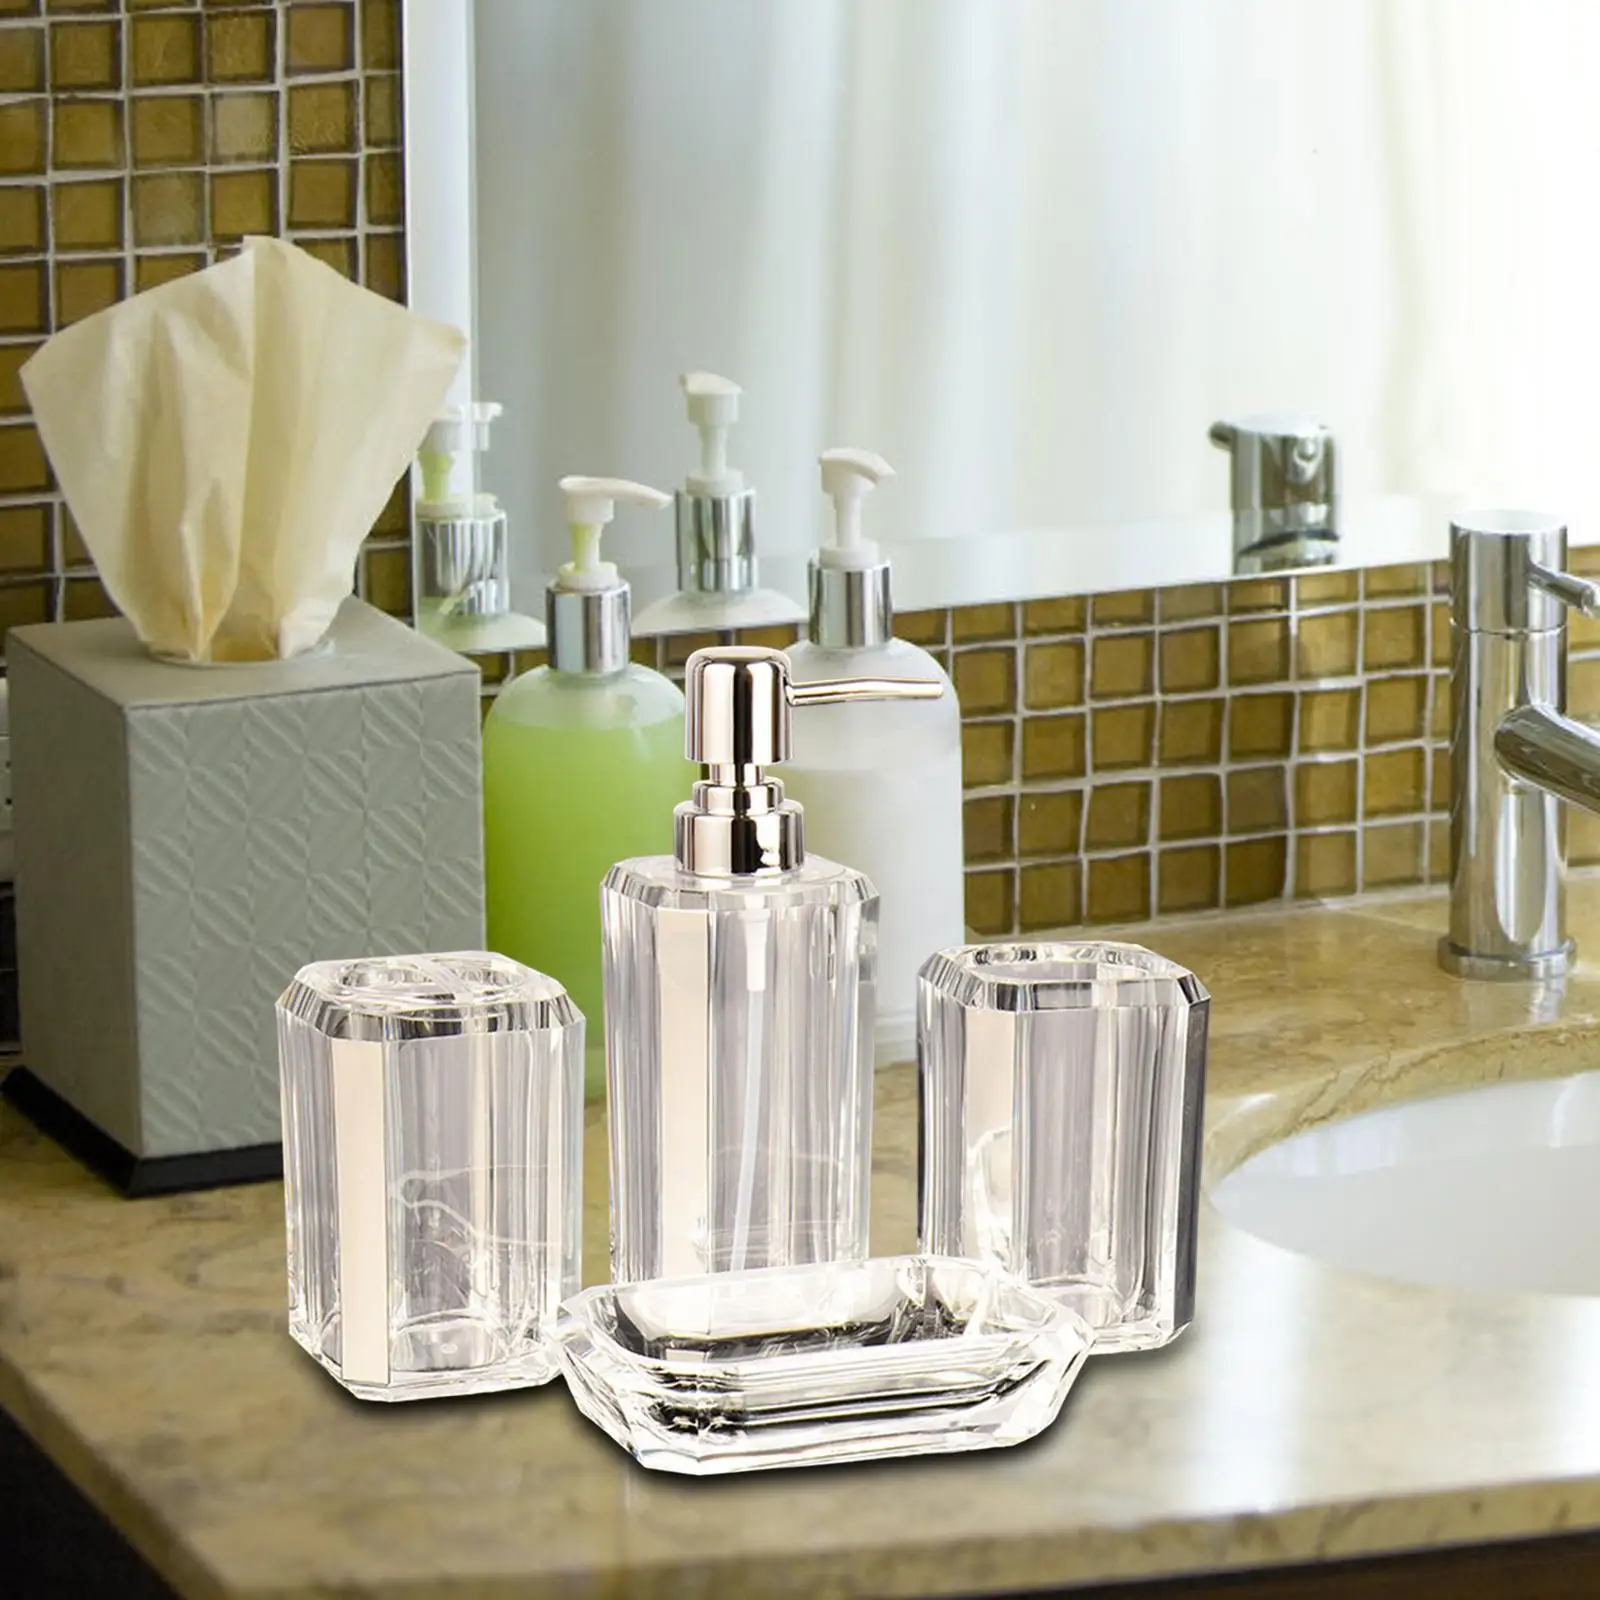 4Pcs Bathroom Accessories Set Lotion Bottle Toothbrush Holder for Home Decor